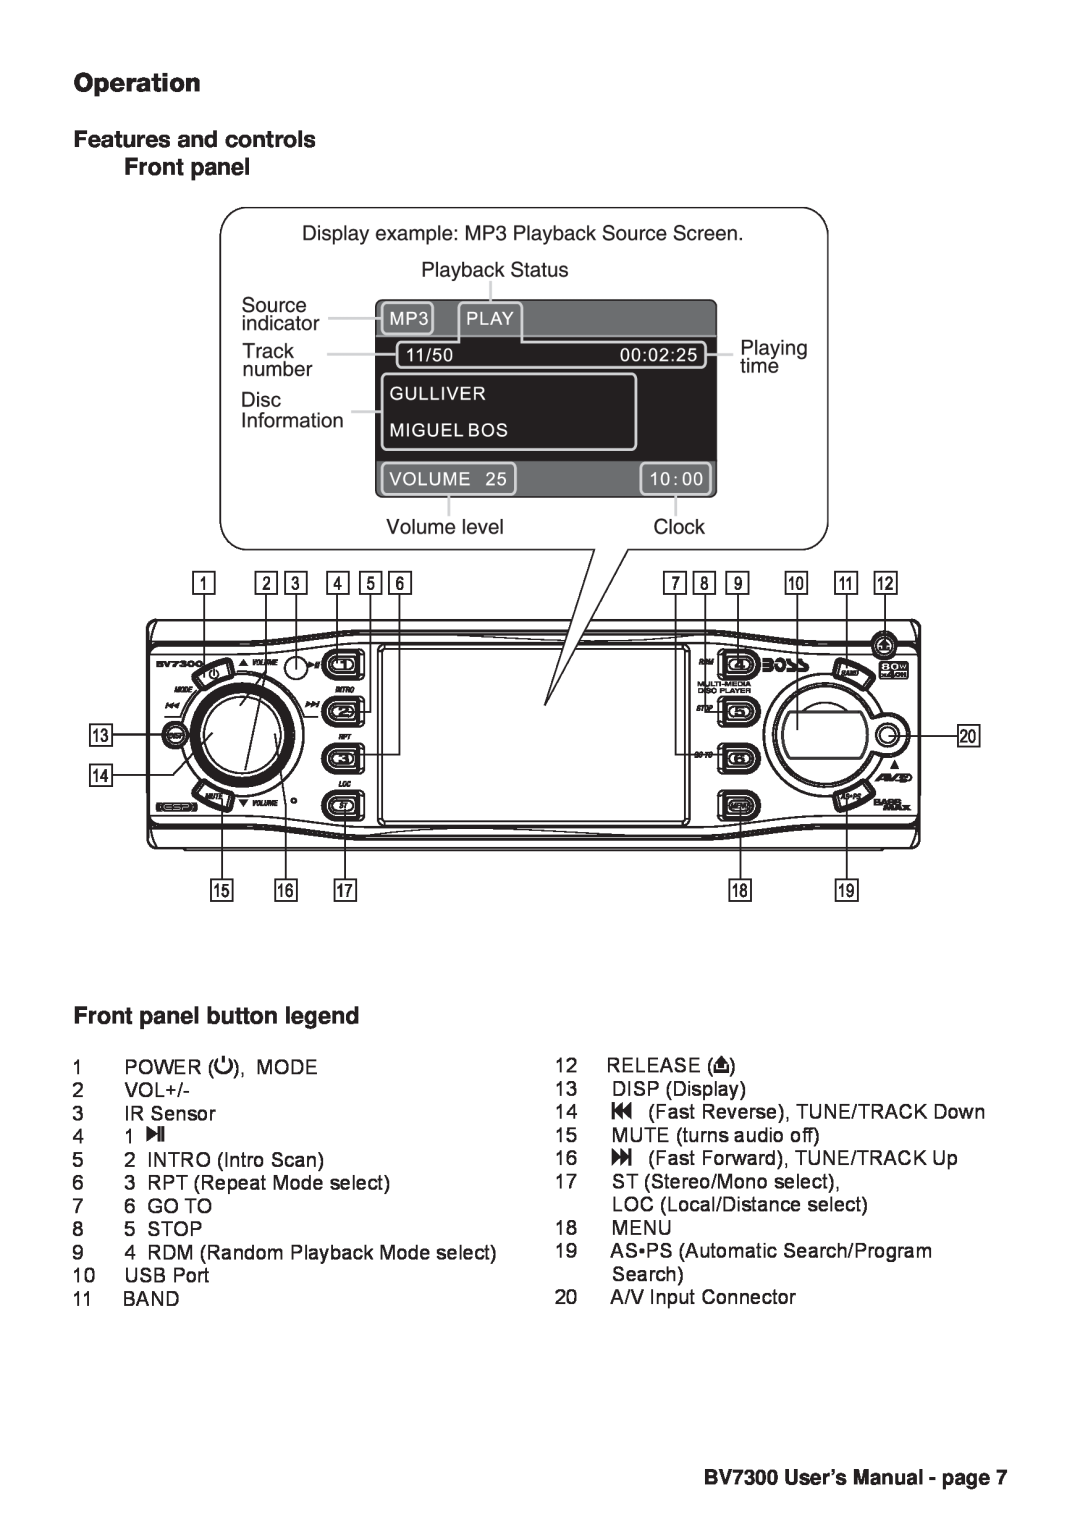 Boss Audio Systems BV7300 manual Operation, Features and controls Front panel, Front panel button legend 